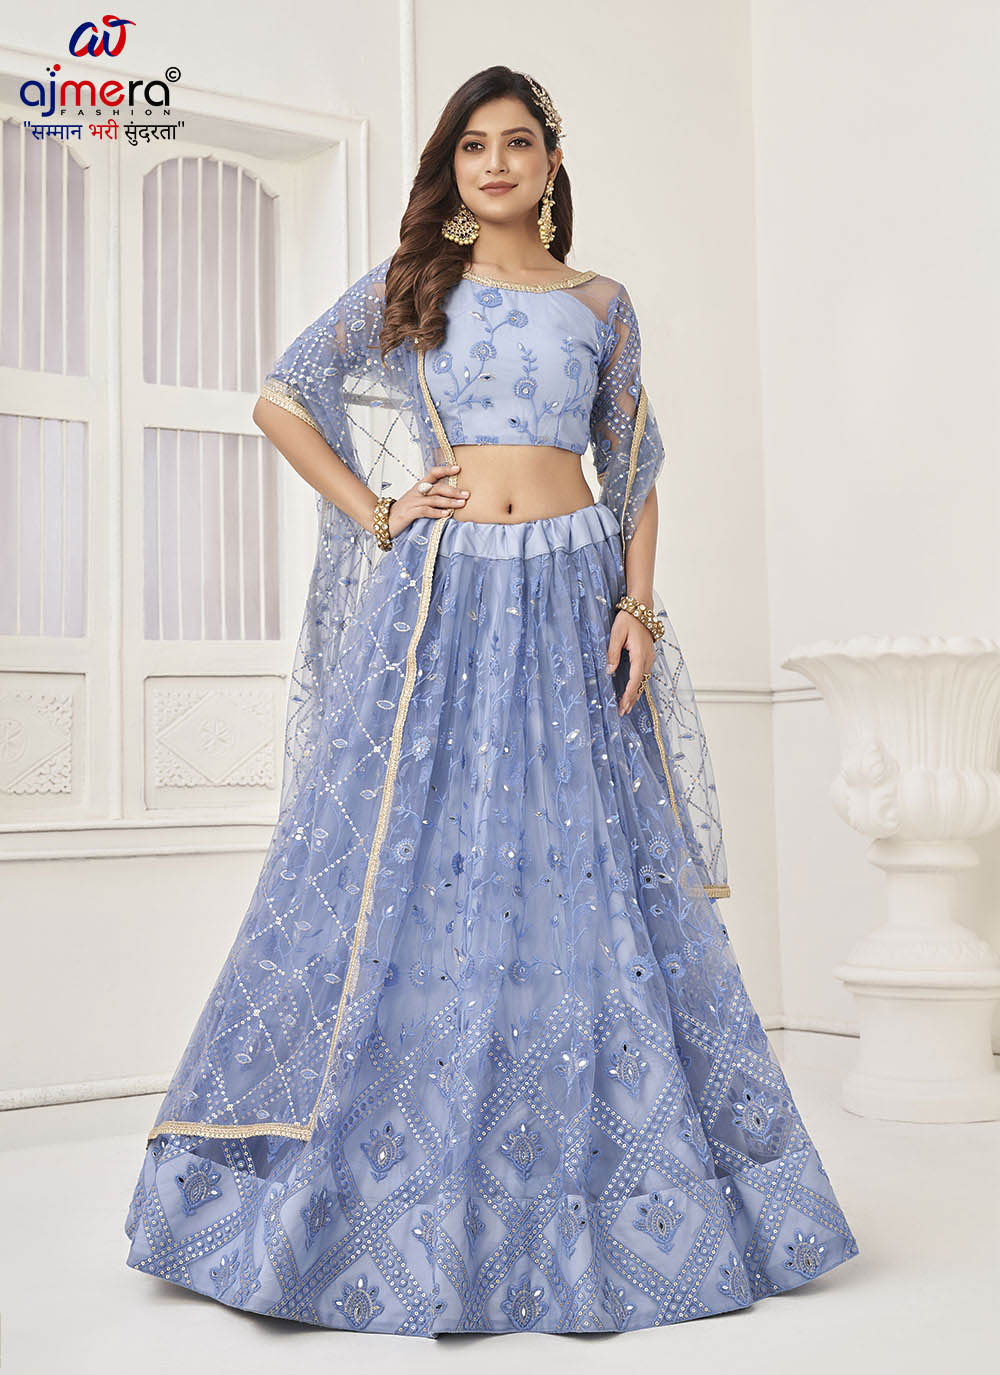 Net Pair Lehnga (2) Manufacturers, Suppliers in Cuttack